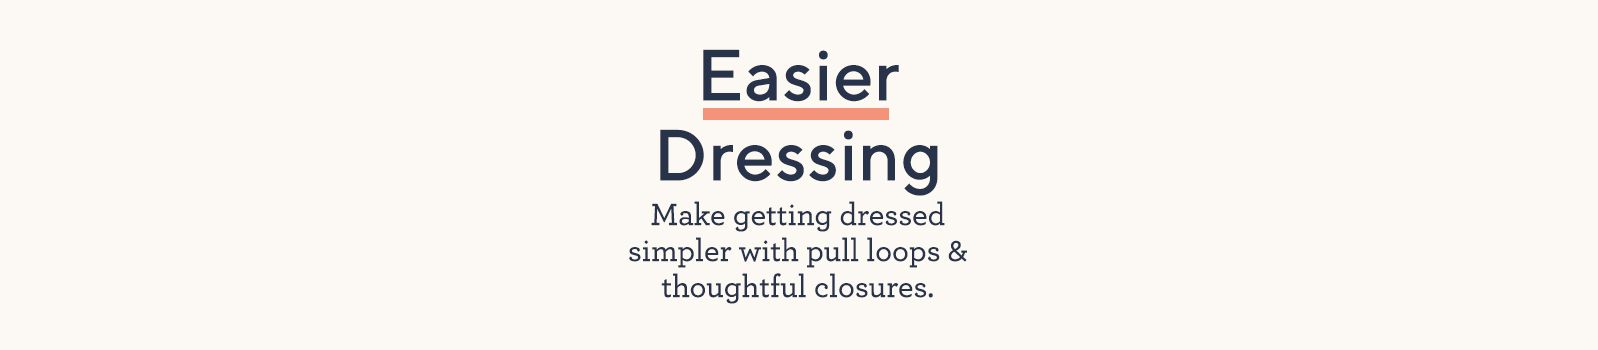 Easier Dressing.  Make getting dressed simpler with pull loops & thoughtful closures.